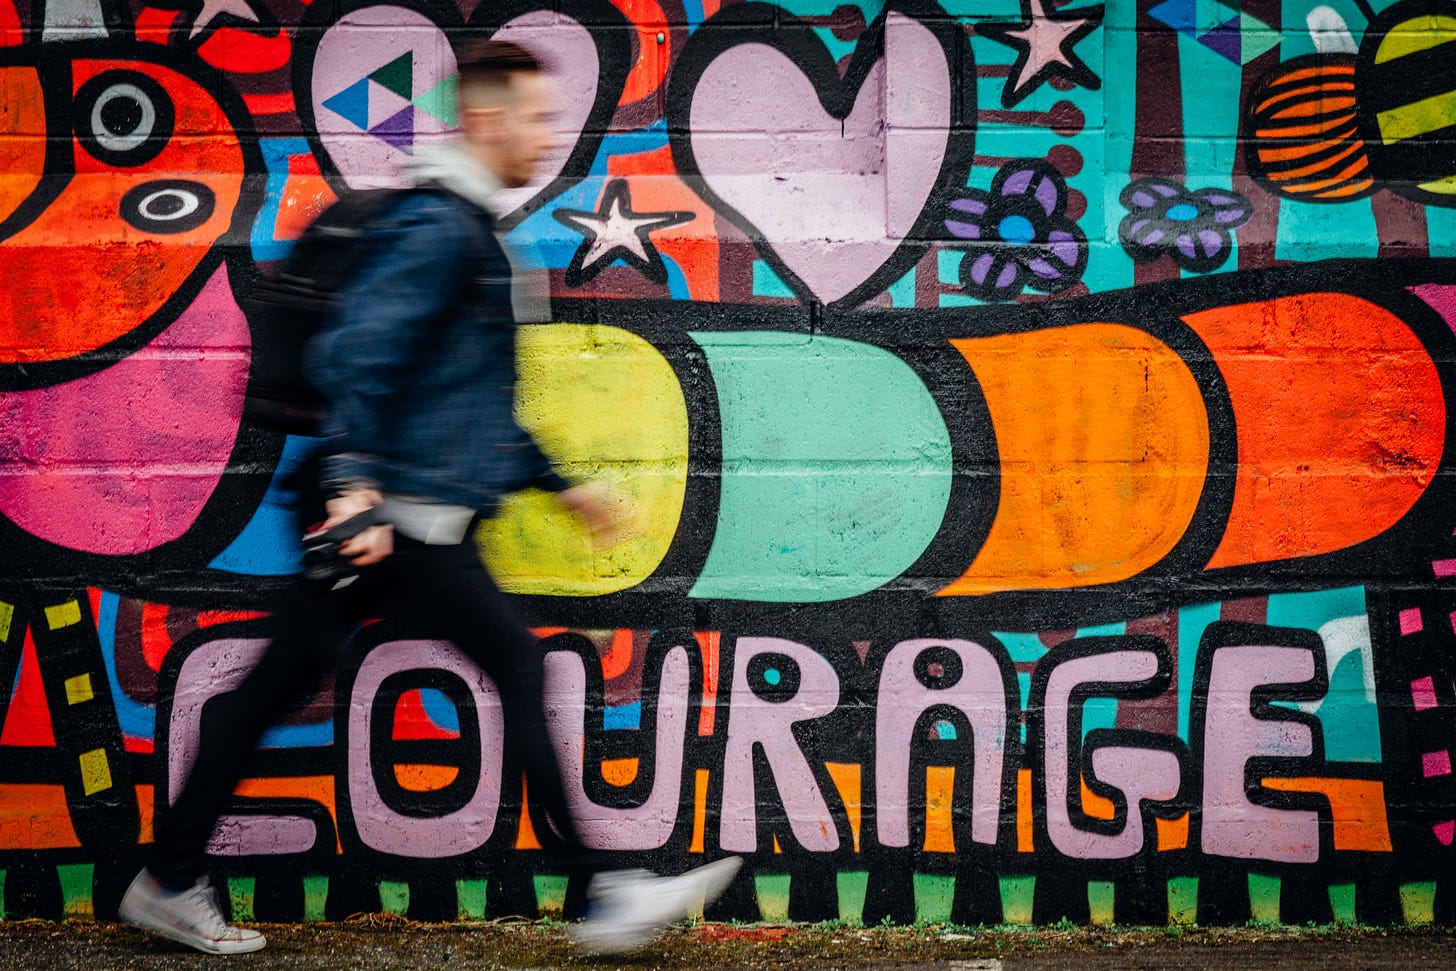 A colorful mural includes the word "courage" in a photograph that has a blurry man walking by